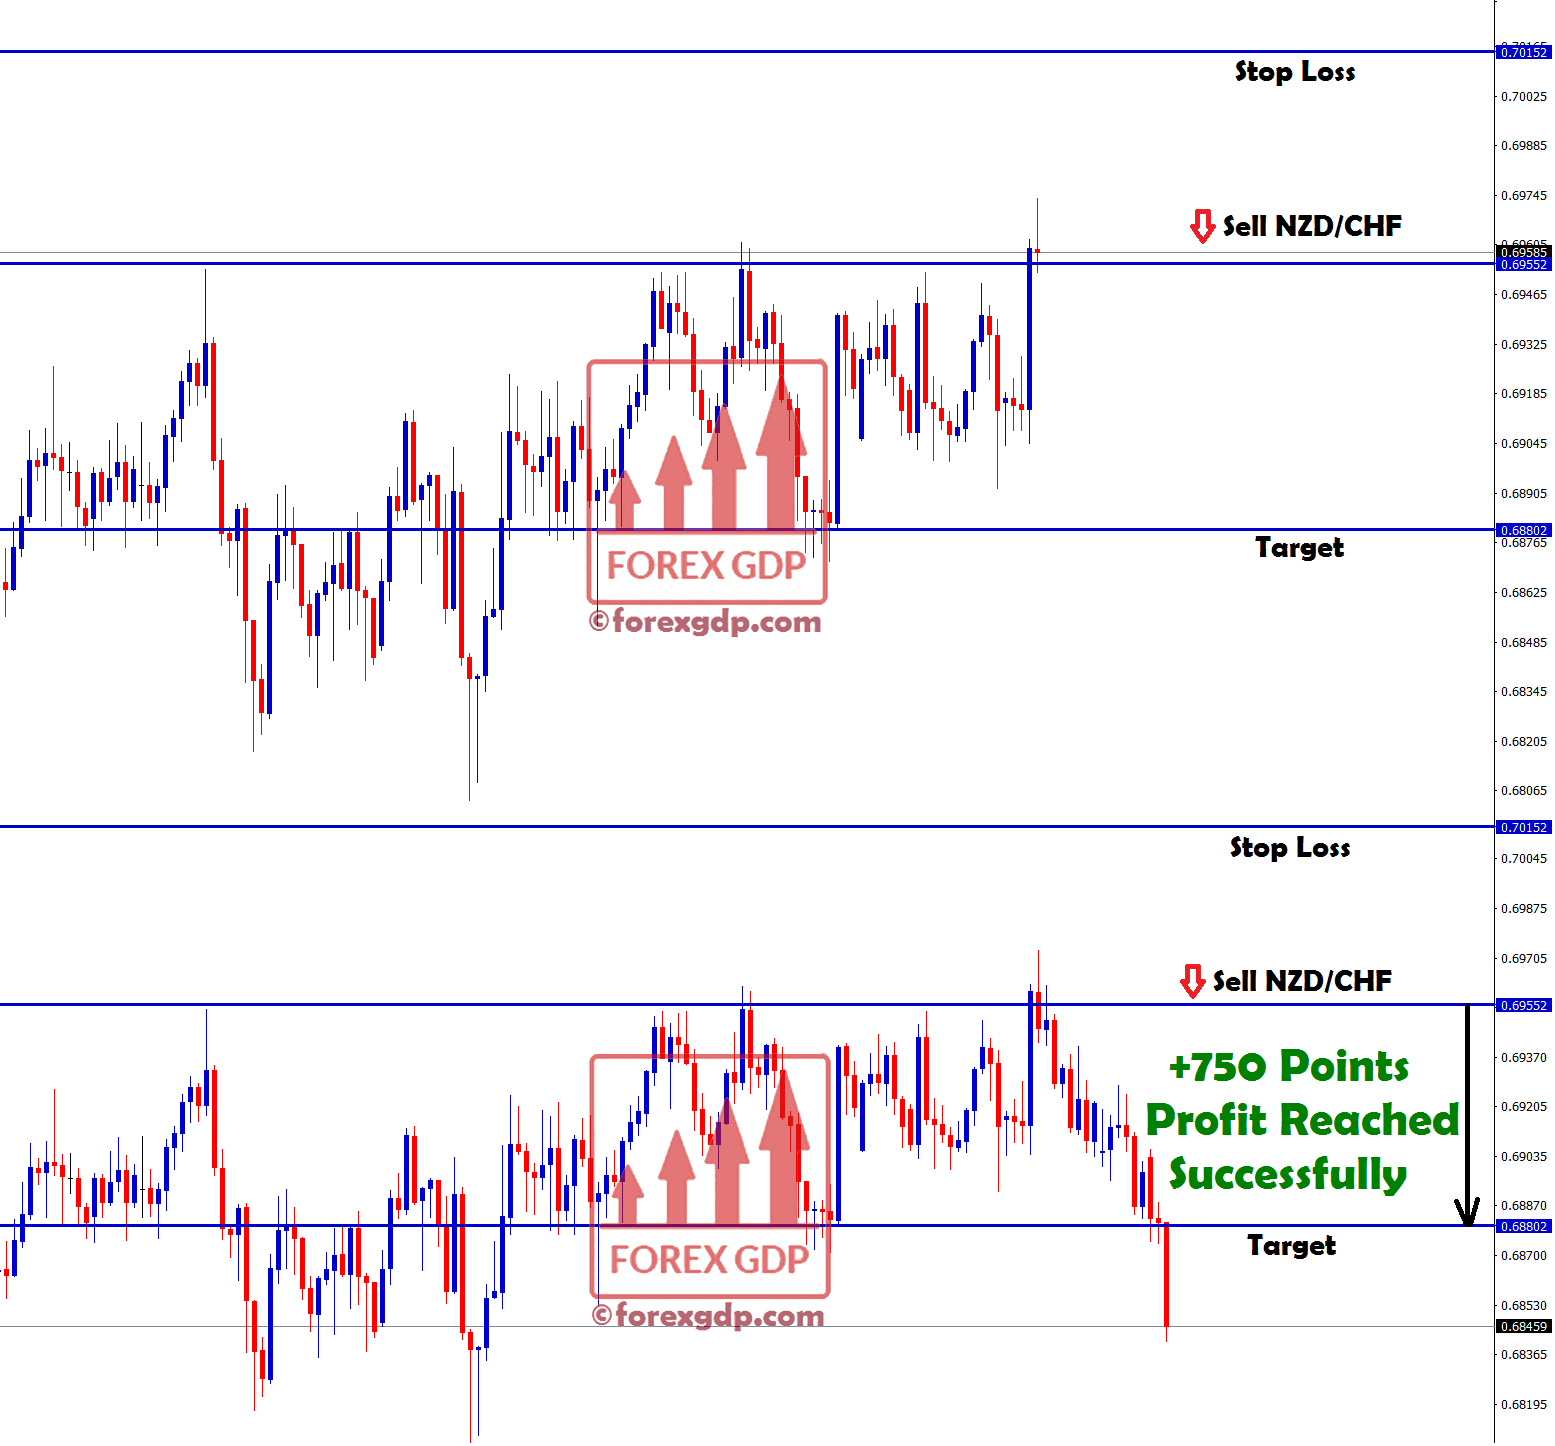 +750 points profit made in nzd chf sell signal